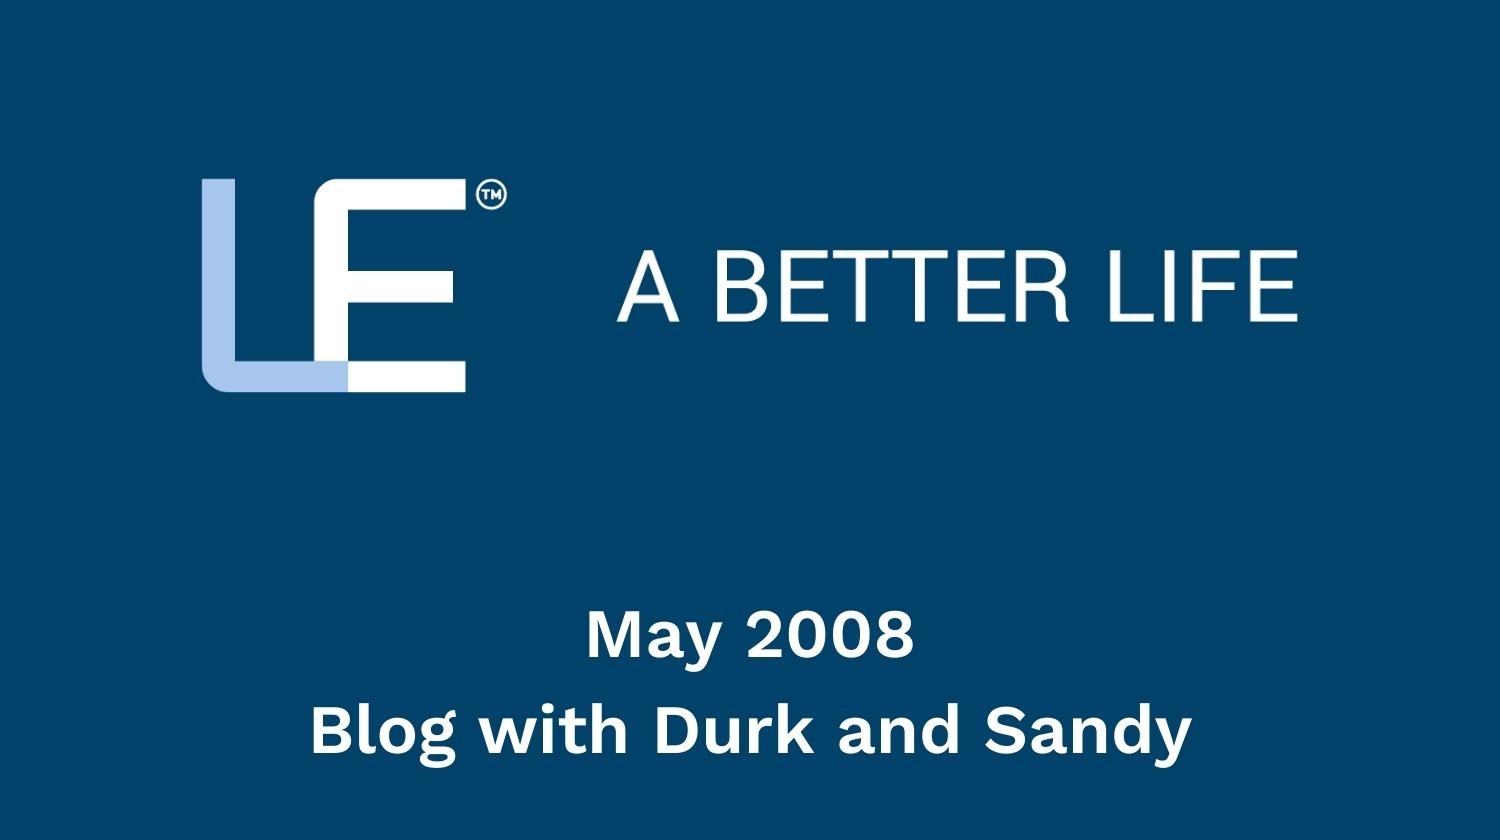 May 2008 Blog with Durk and Sandy